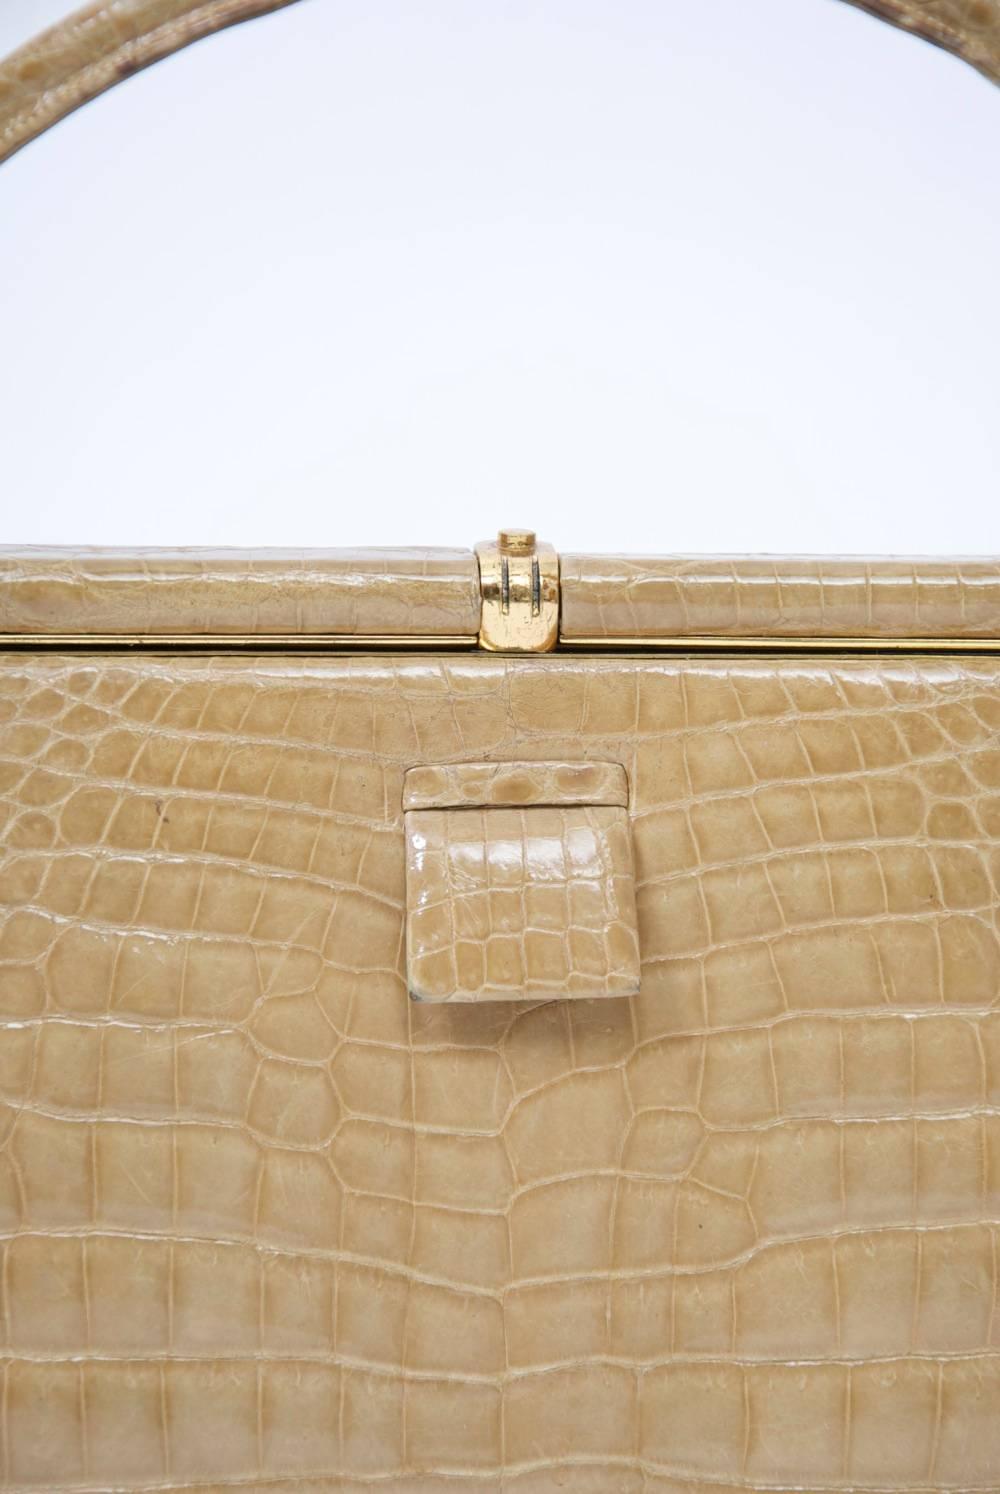 Classic 1960s Lucille de Paris handbag in neutral tan crocodile featuring a single handle and minimal goldtone clasp with small tab in front to help open. Camel leather interior with multiple side pockets, including one with snapped flap.